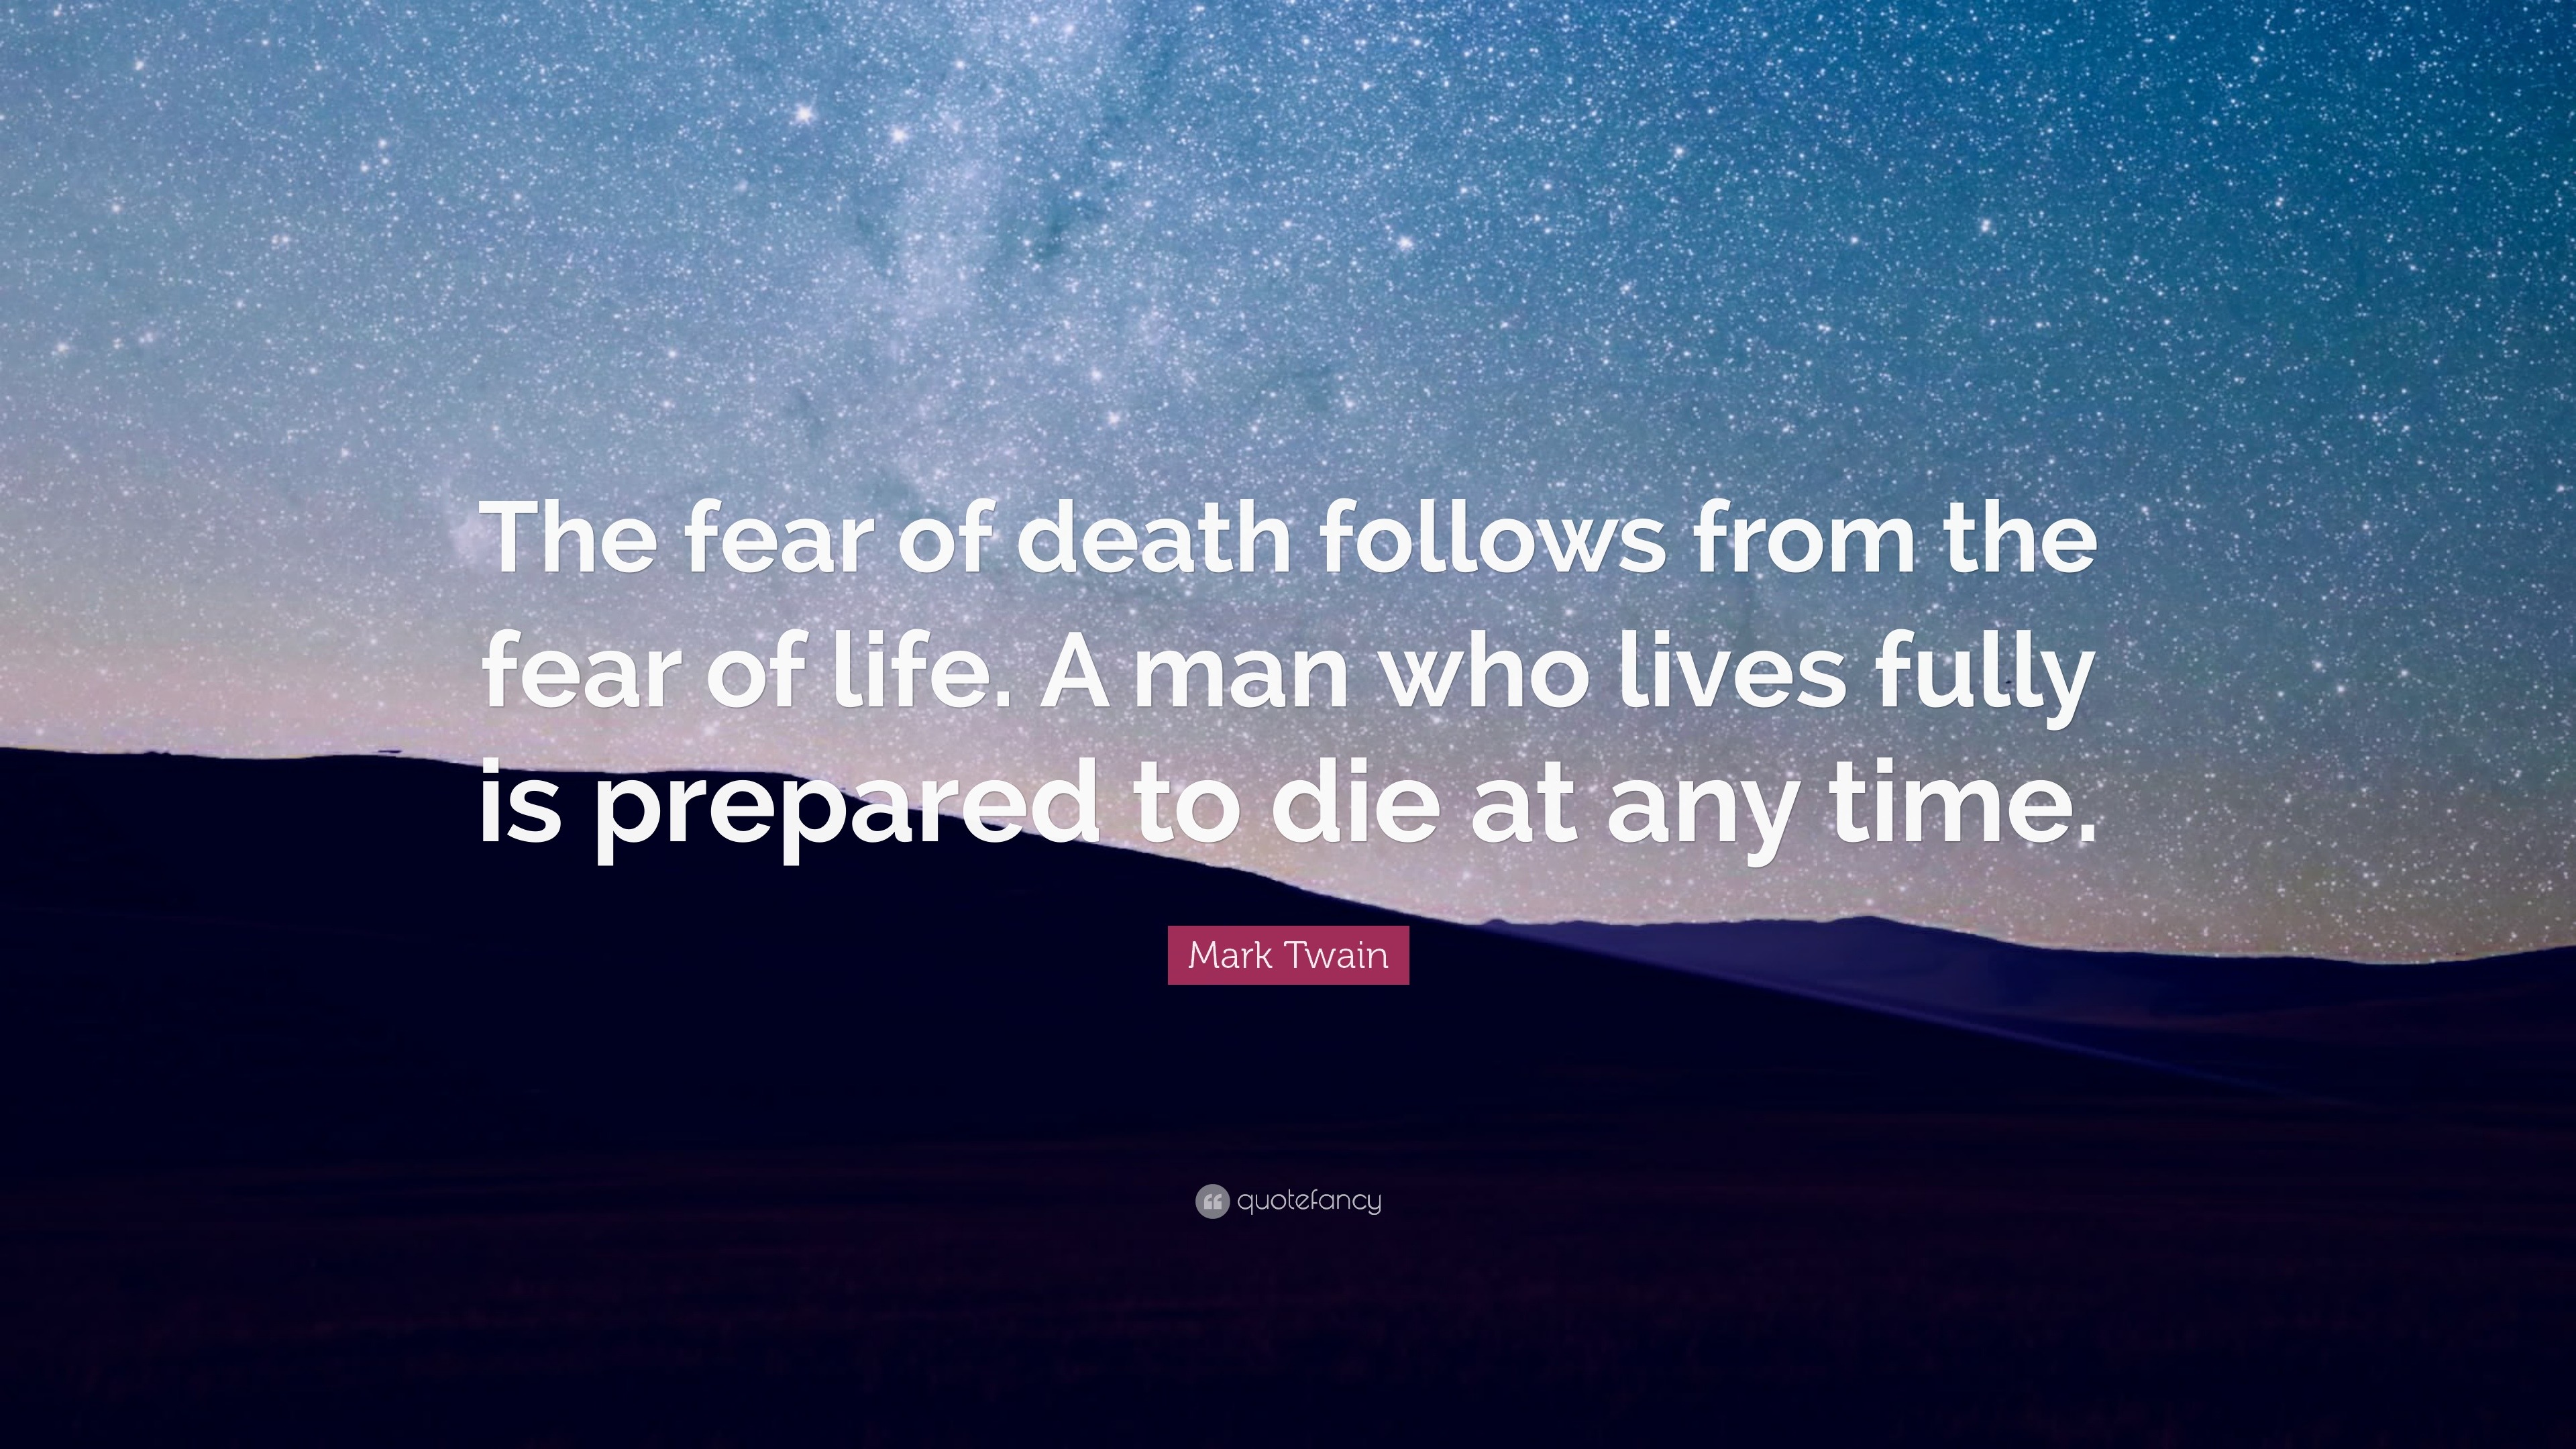 Mark Twain Quote “The fear of follows from the fear of life